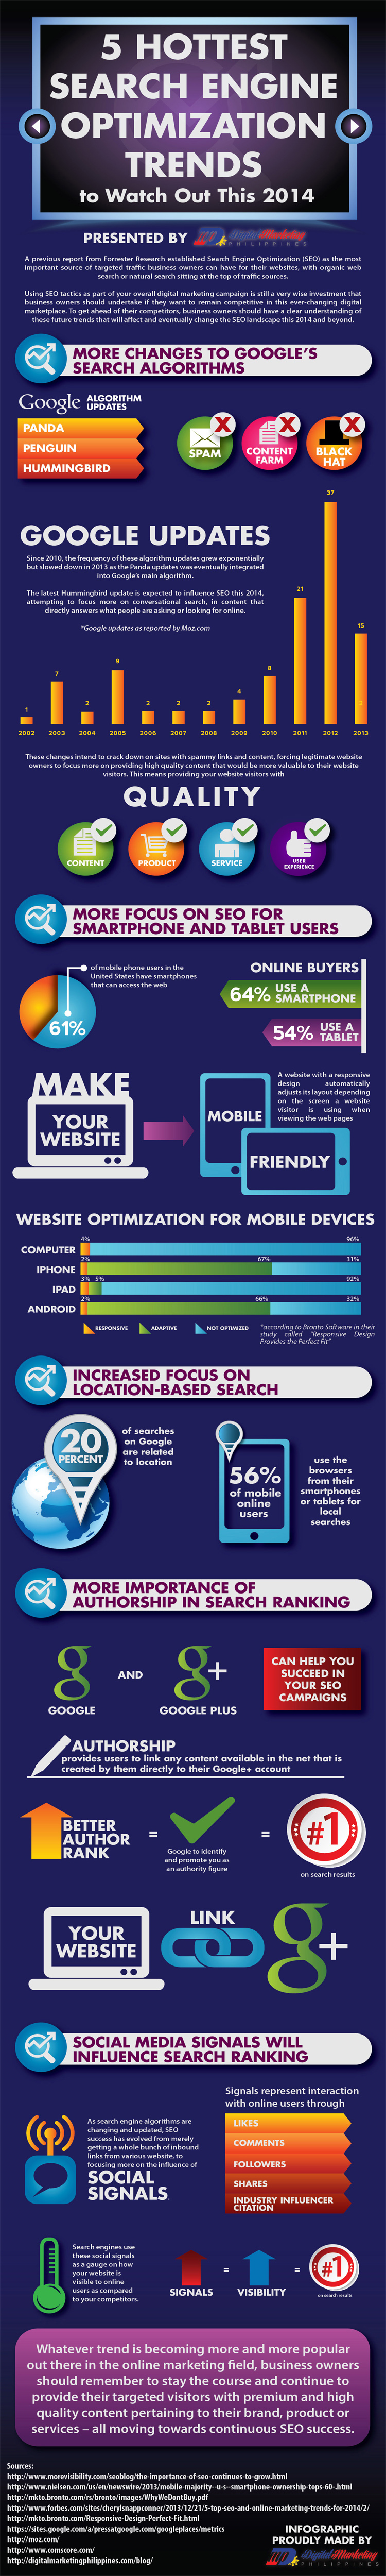 5 Hottest Search Engine Optimization Trends to Watch Out This 2014